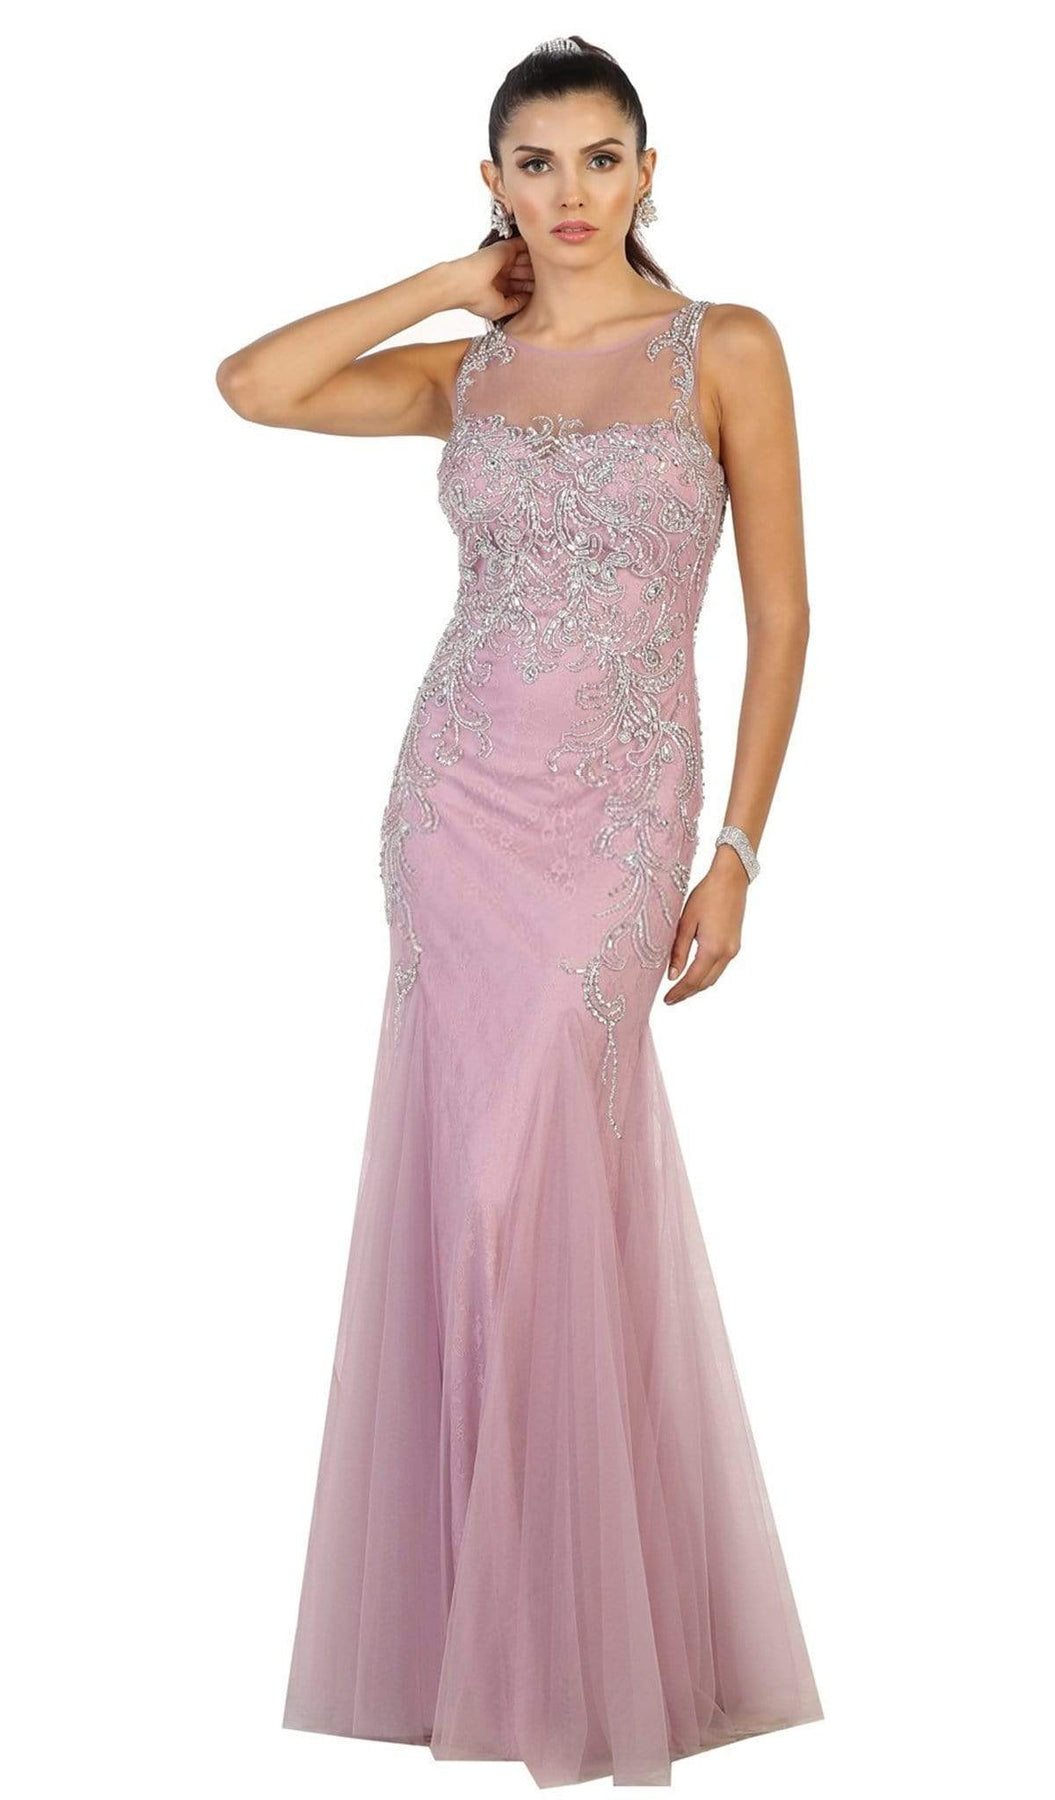 May Queen - Bedazzled Illusion Bateau Trumpet Prom Dress Special Occasion Dress 4 / Mauve